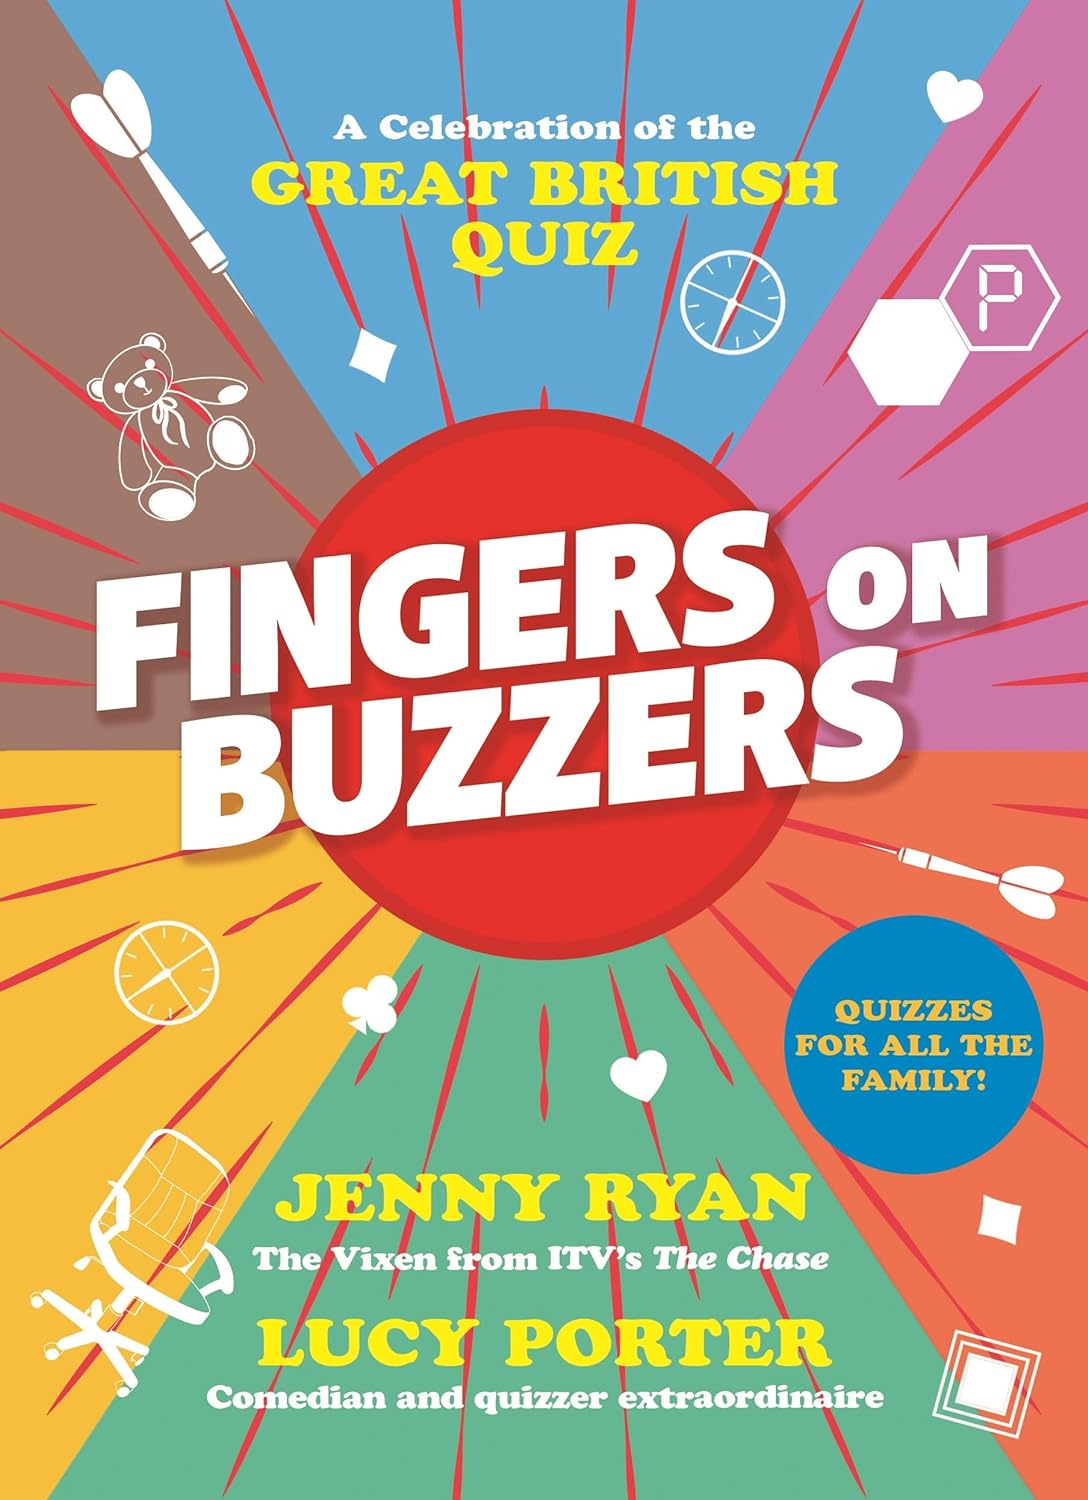 Fingers on buzzers book cover